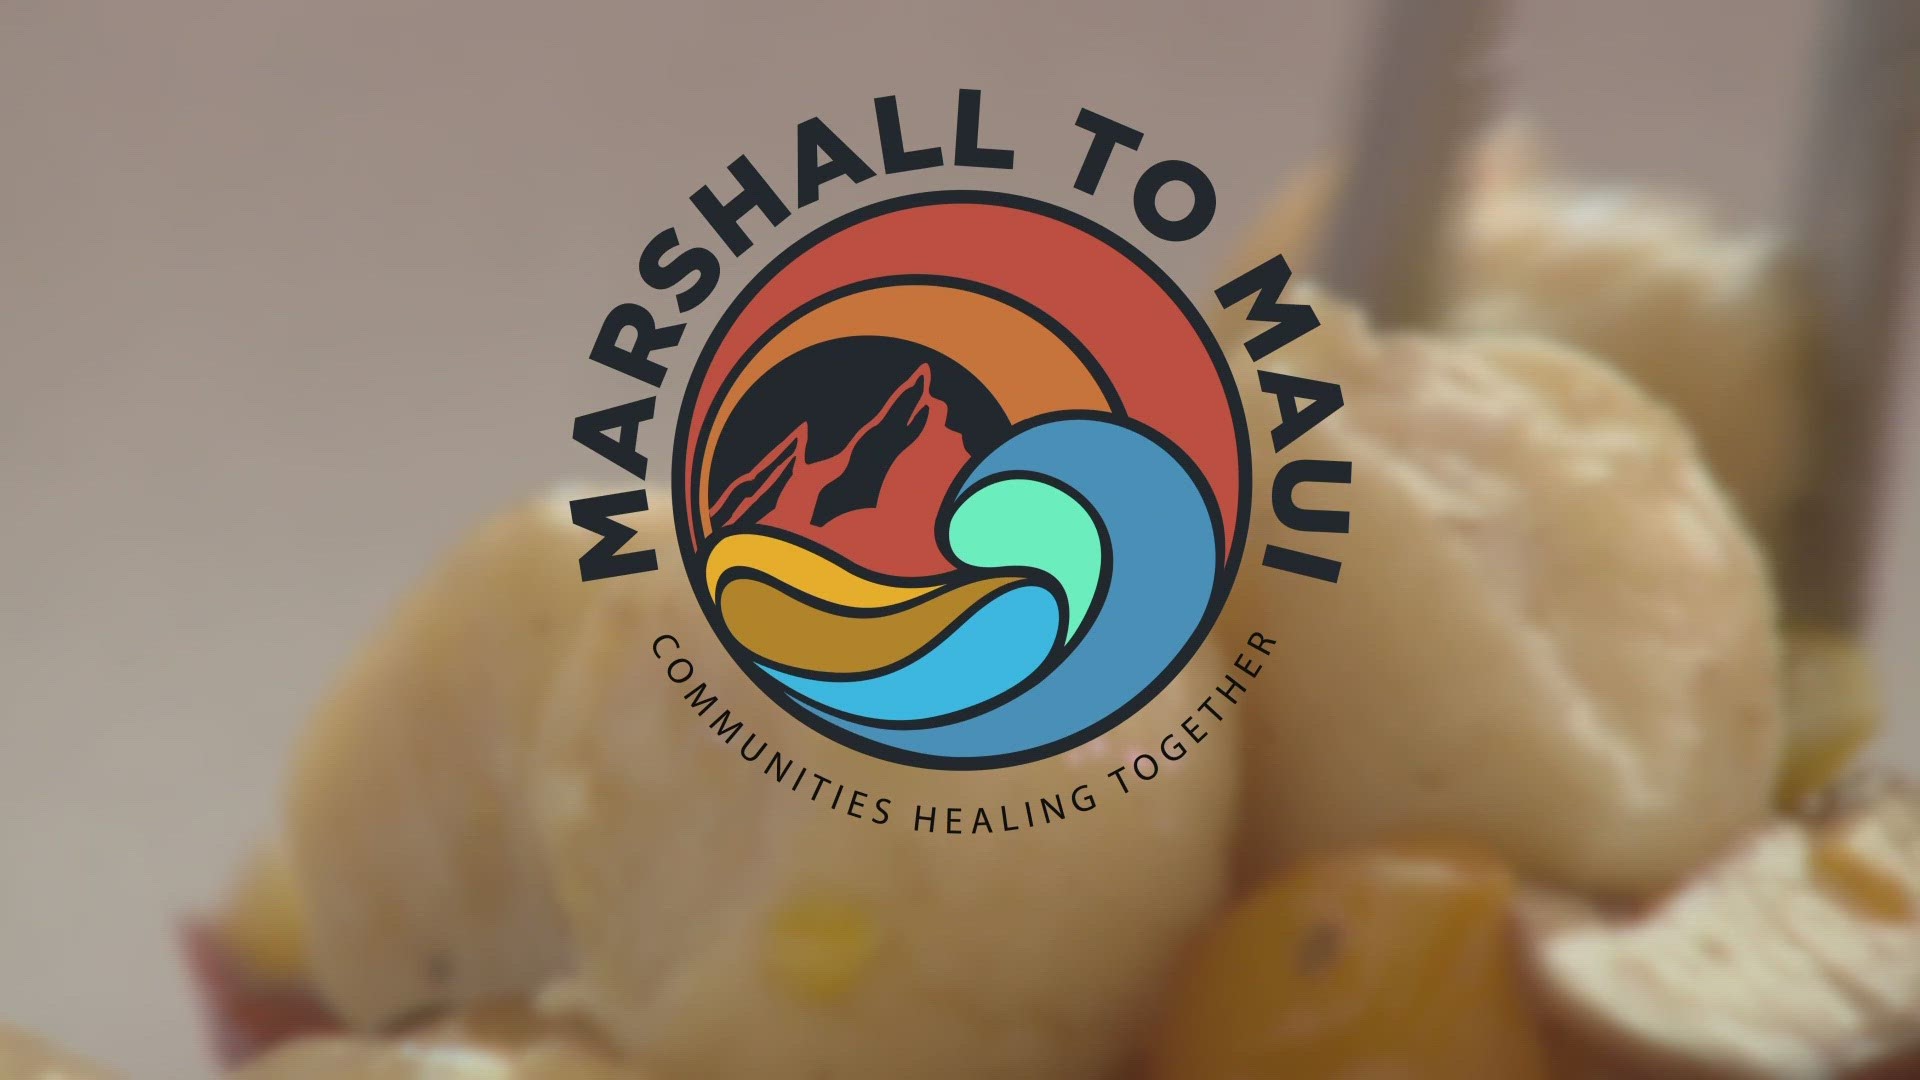 Upslope Brewing in Boulder is hosting a 'Marshall to Maui' dinner event on Thursday with proceeds going to survivors of the devastating wildfires in Maui last month.